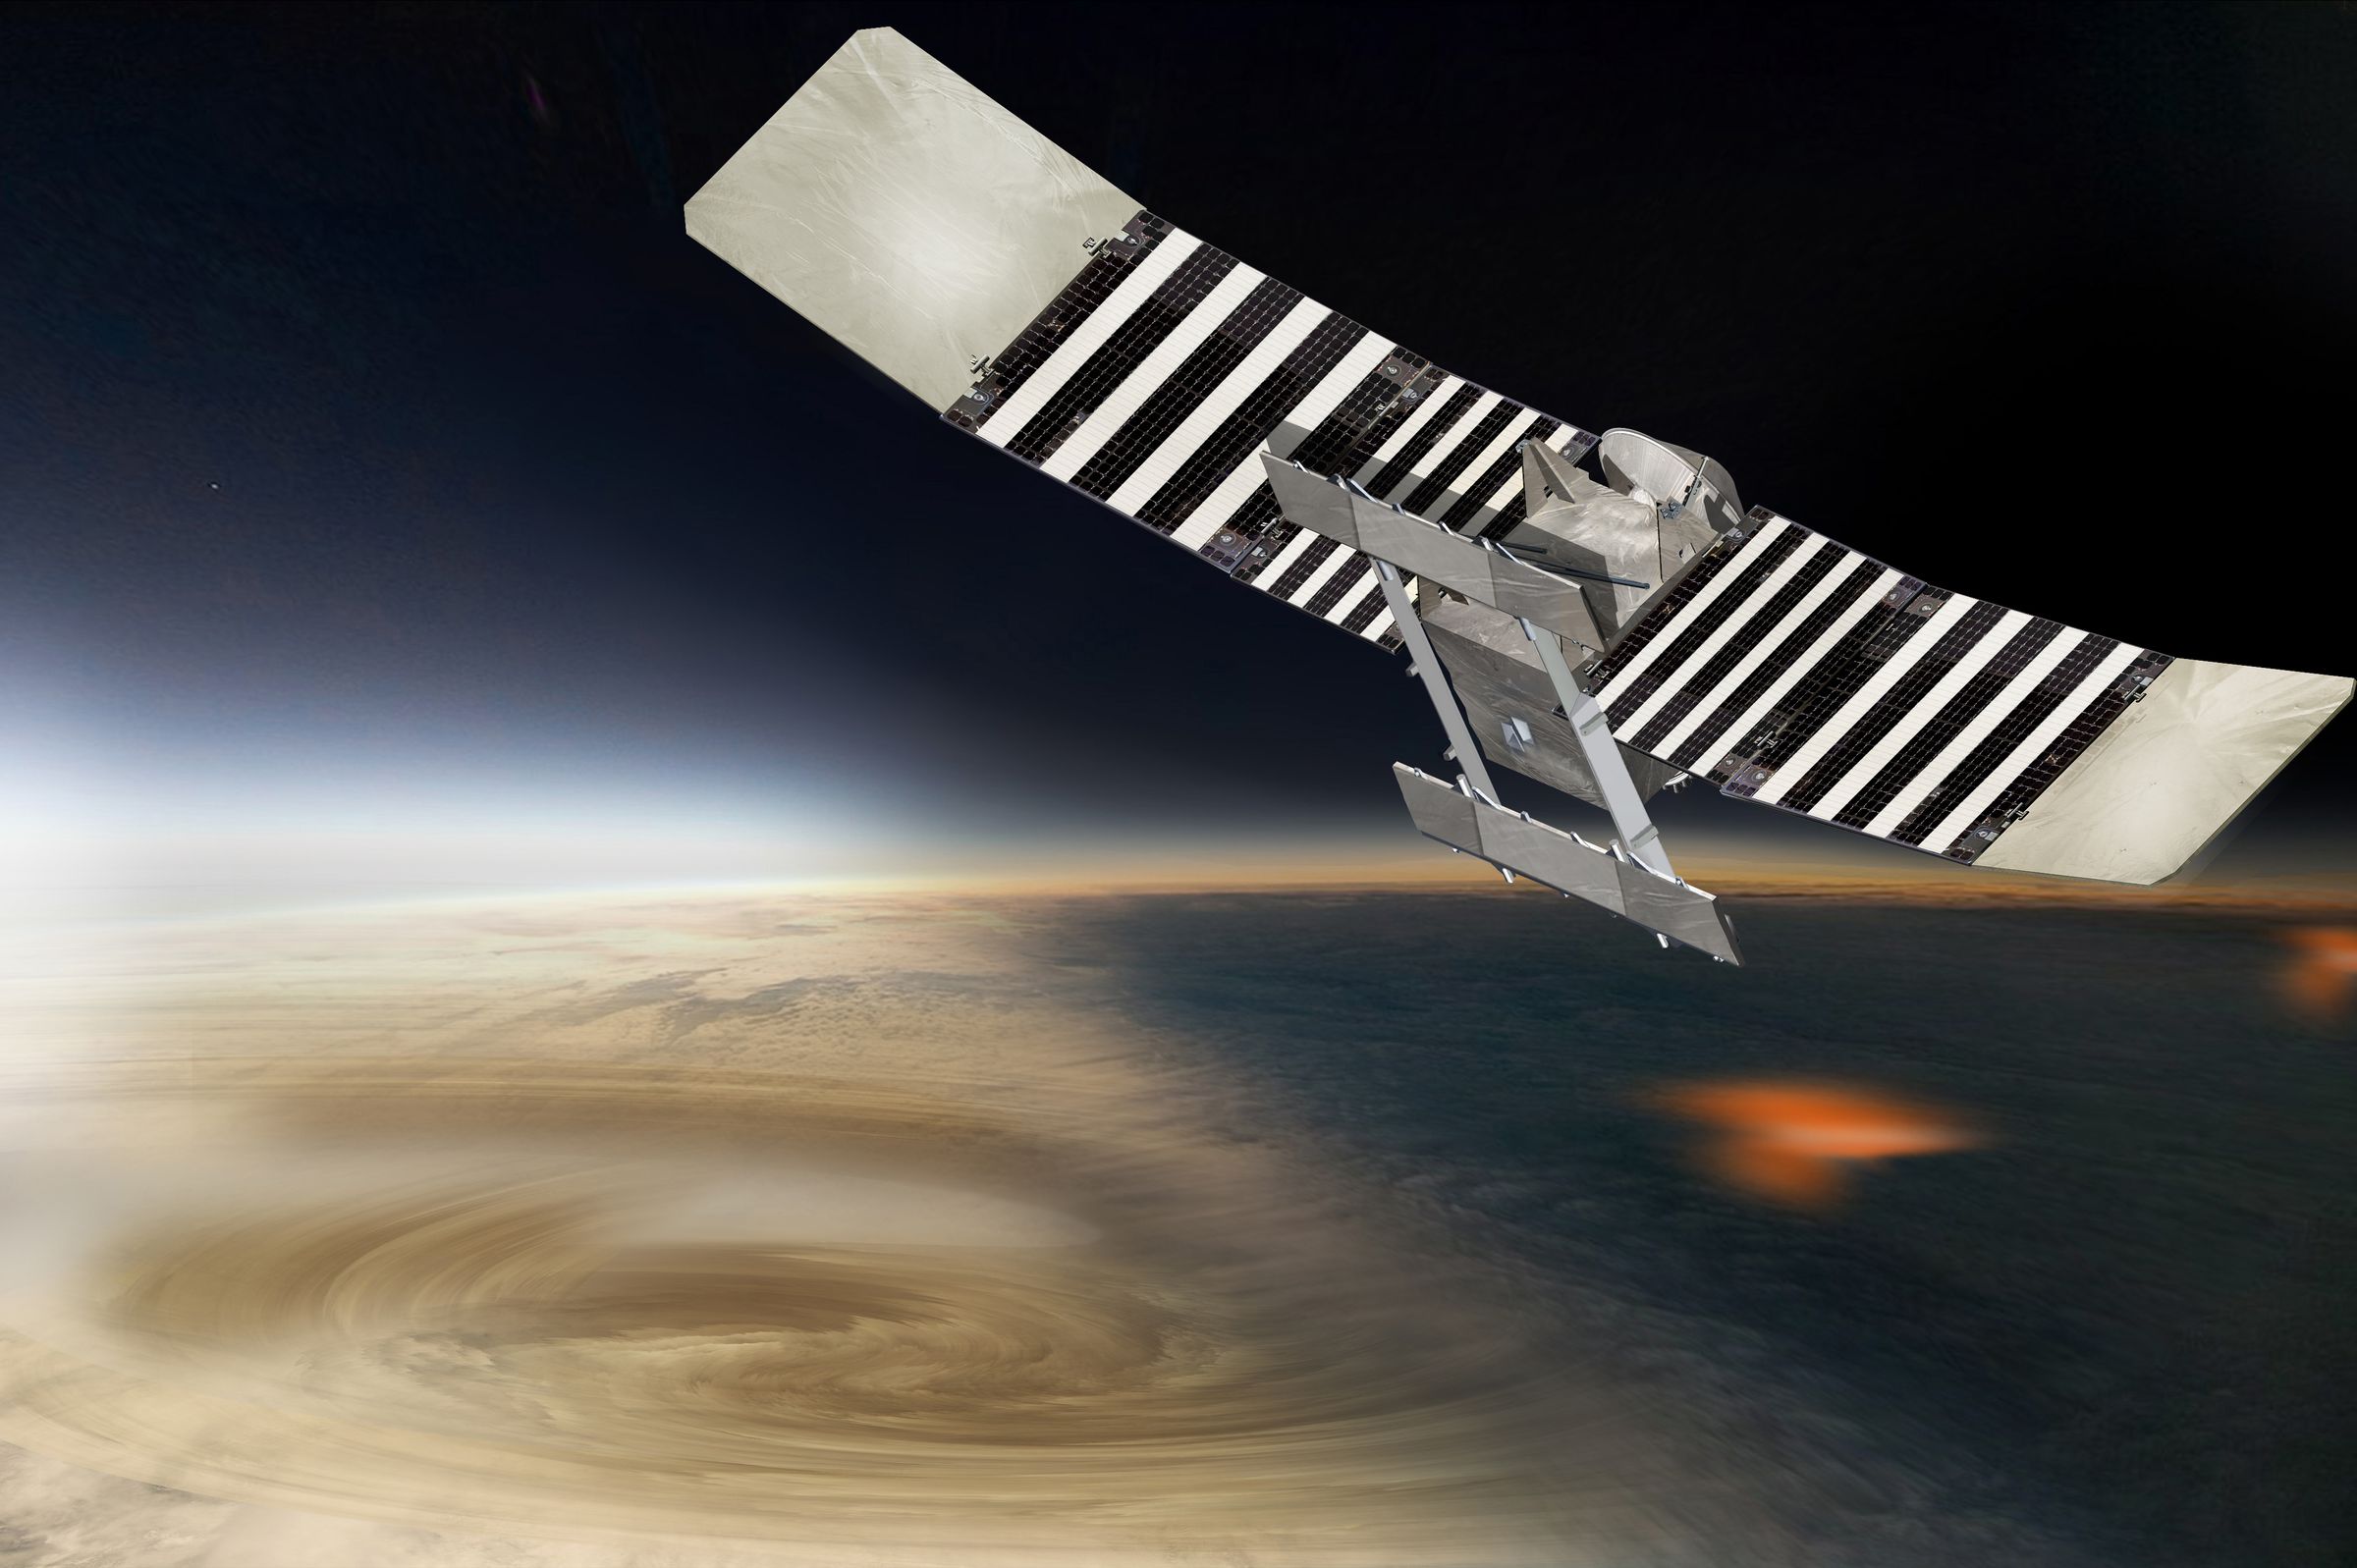 The VERITAS mission would map Venus with radar and infrared spectroscopy.